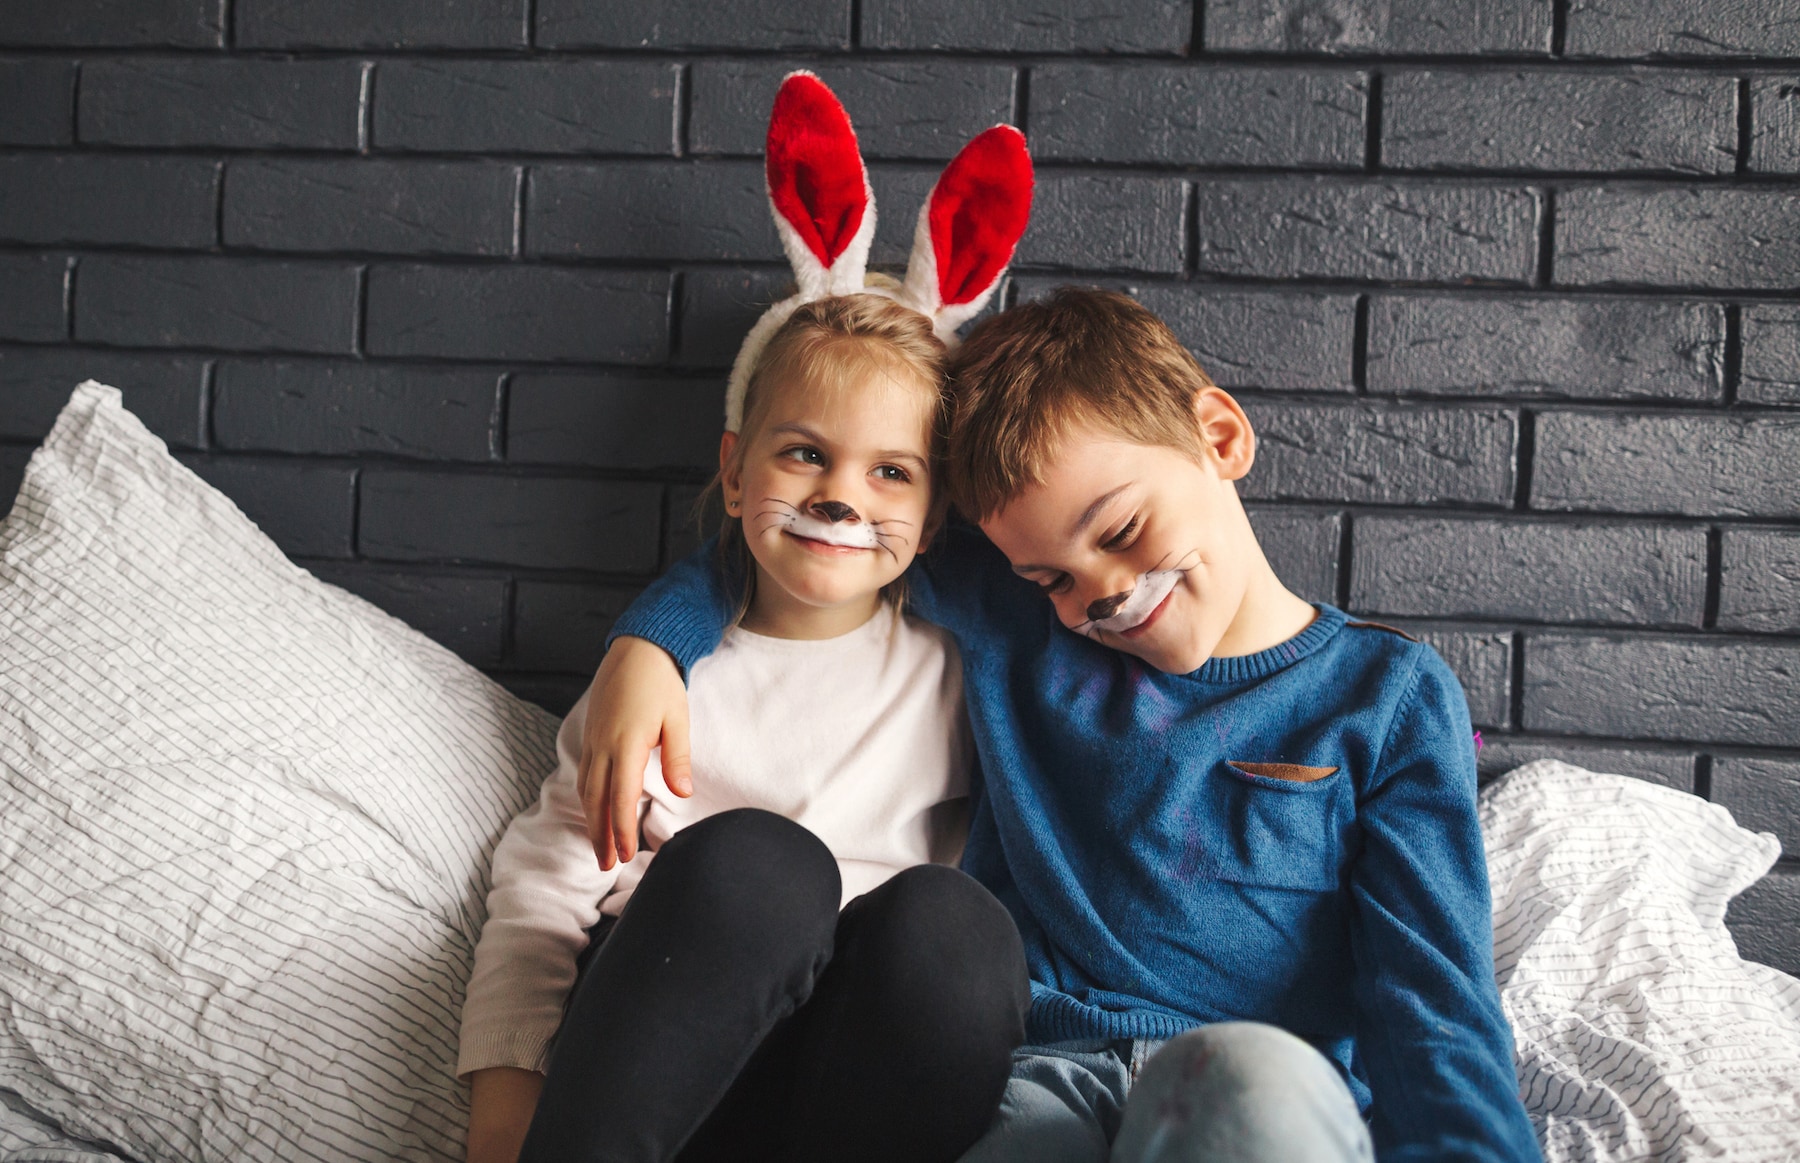 Call the Easter Bunny and 5 other ways to create an extra magical holiday for kids